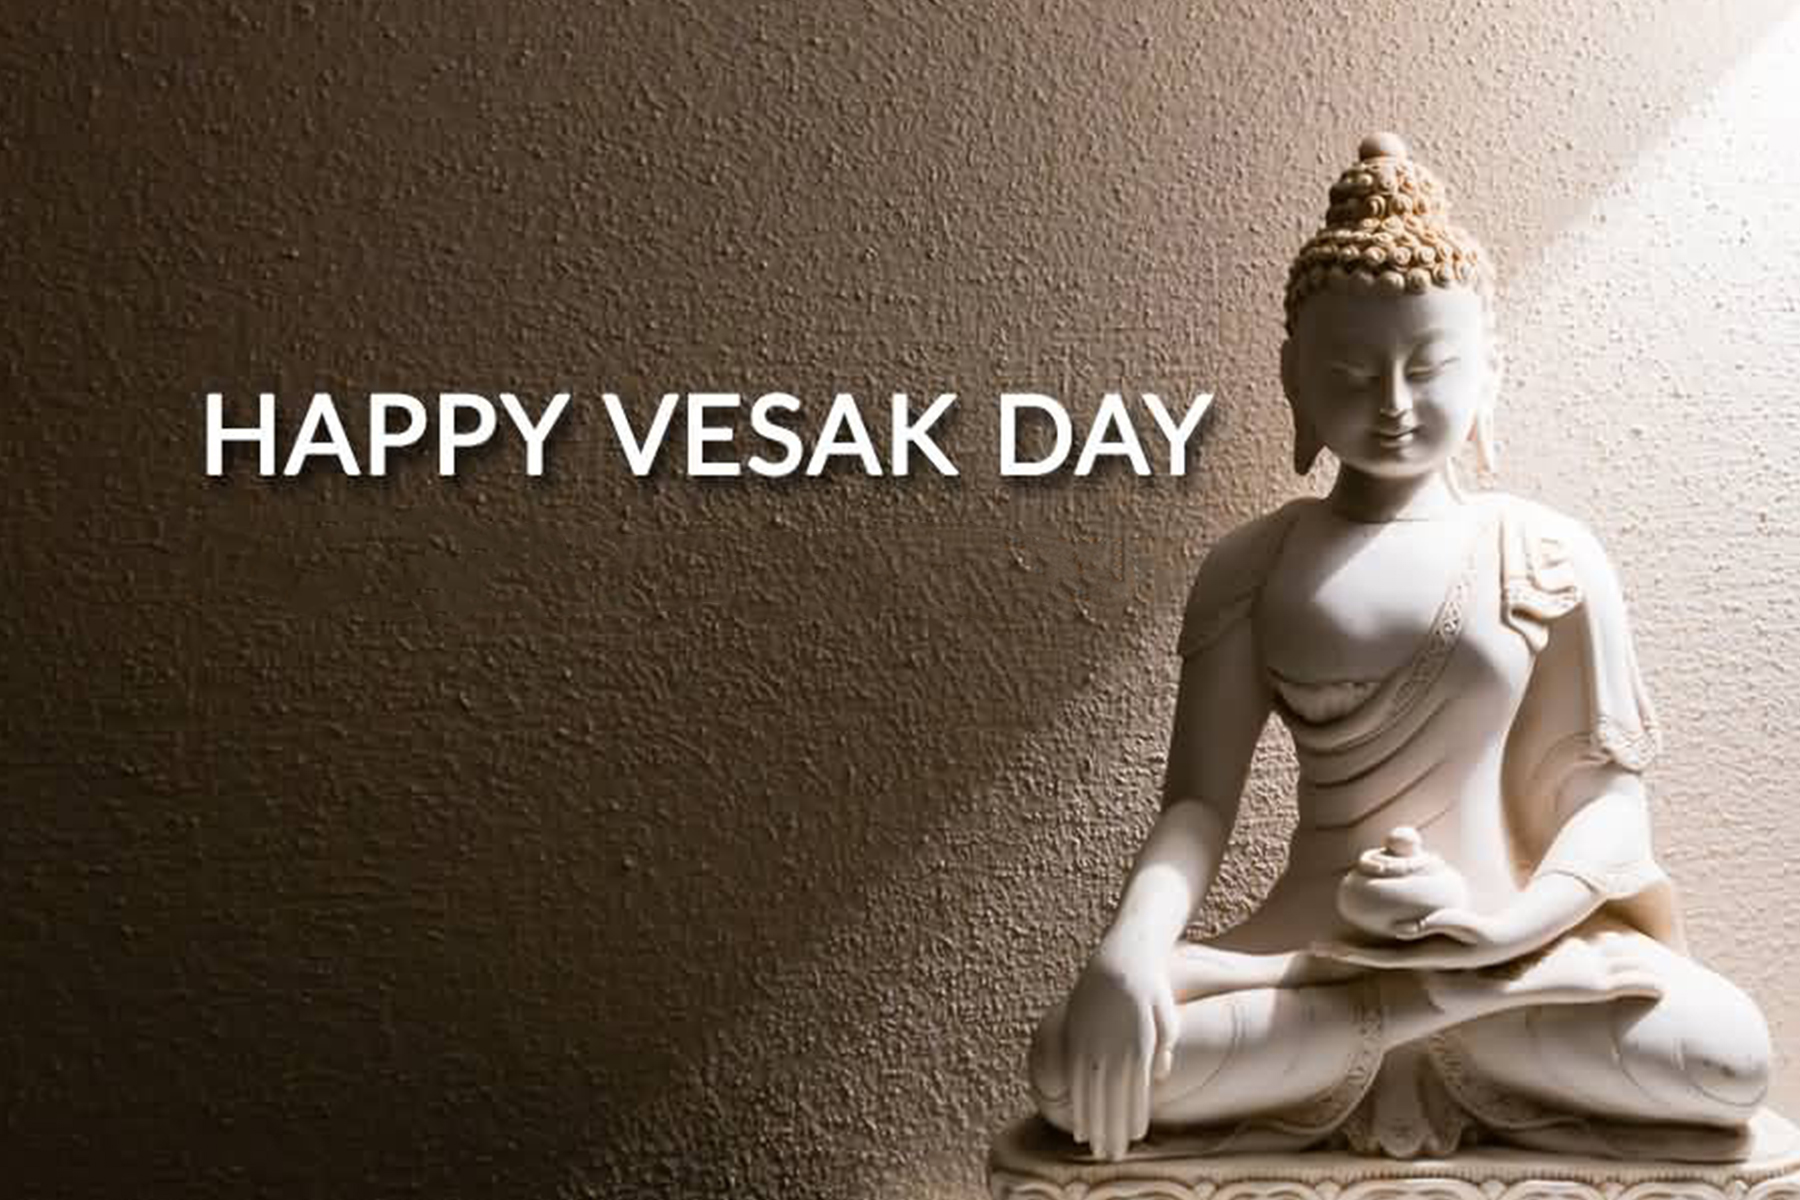 Wesak day means